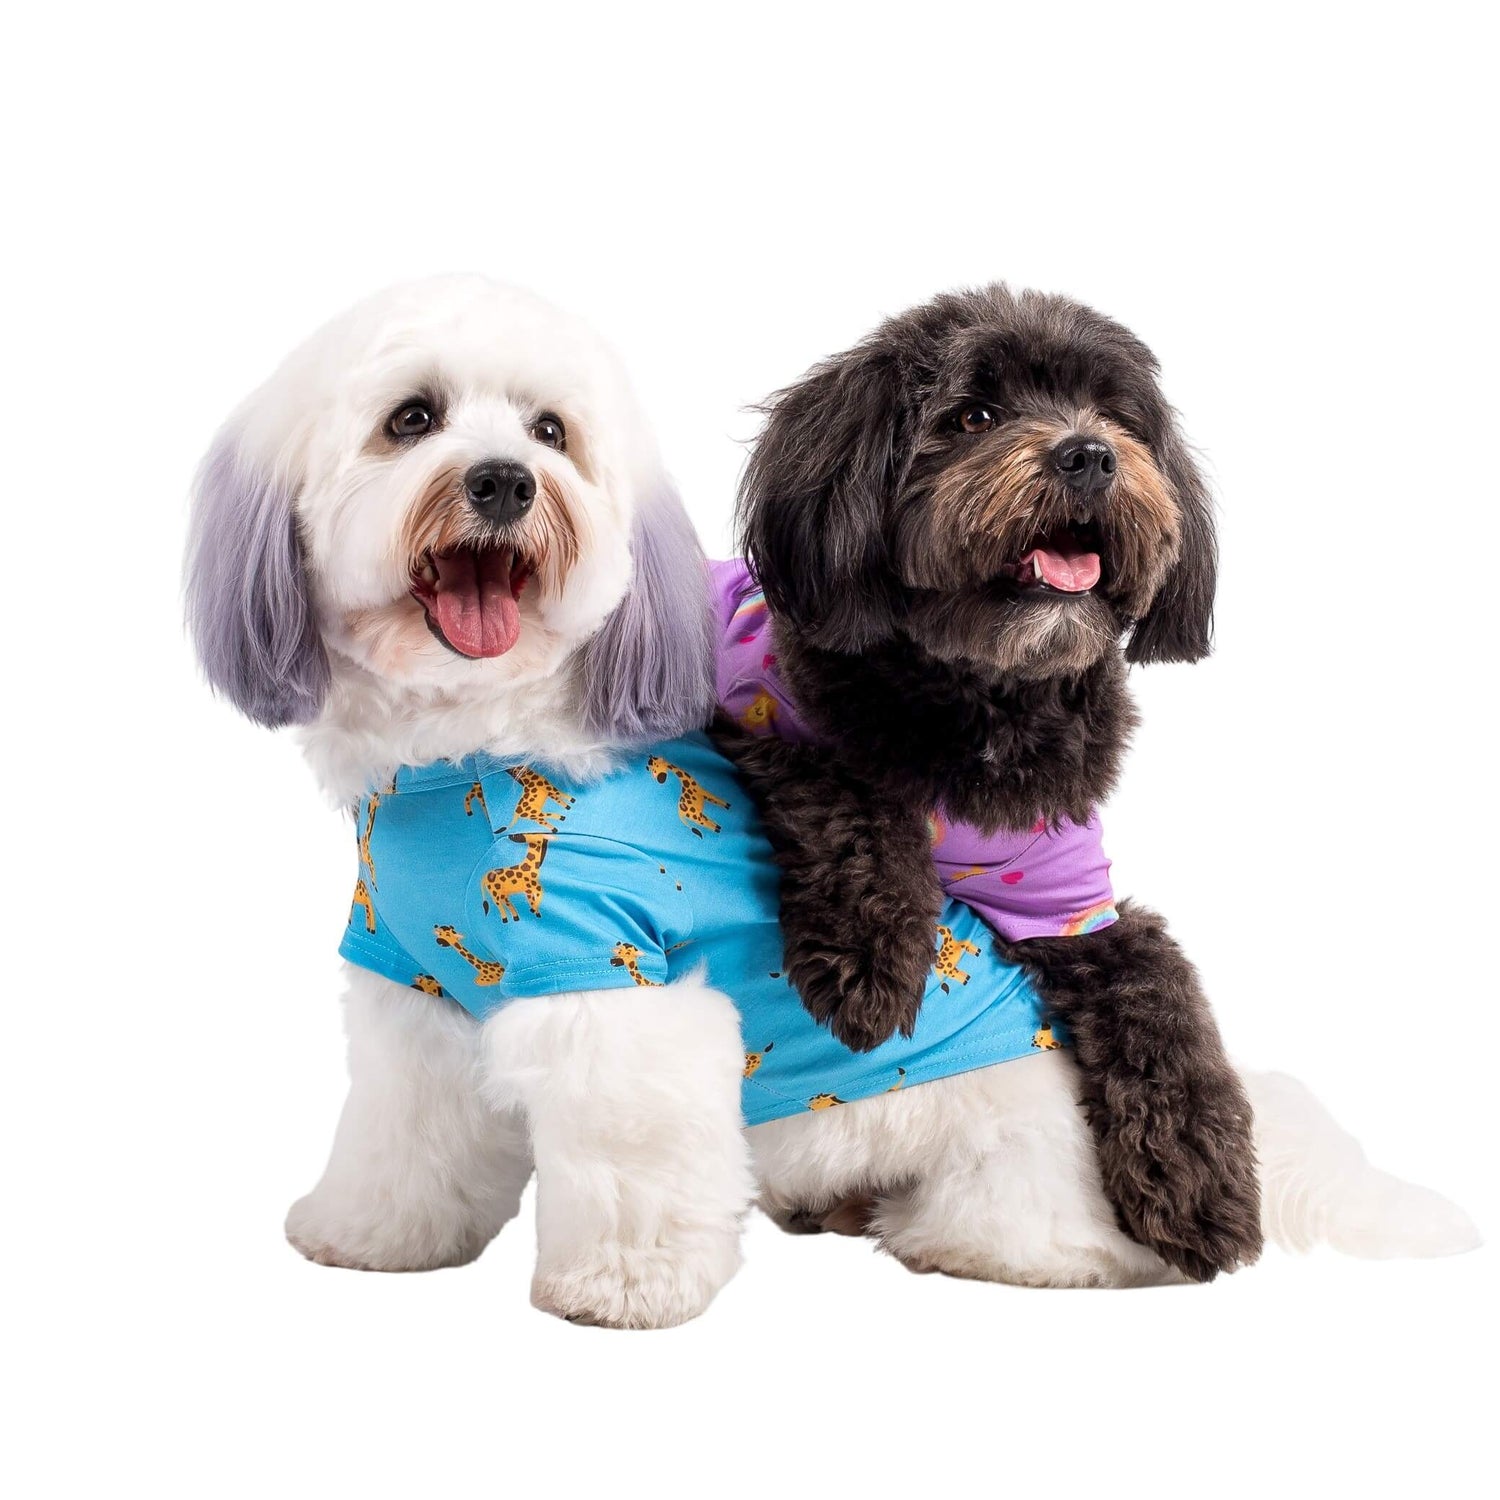 Two dogs wearing Vibrant Hound dog pyjamas. One shirt is white and blue with girrafes printed on it. The other shirt is purple with rainbows and love hearts printed on it.